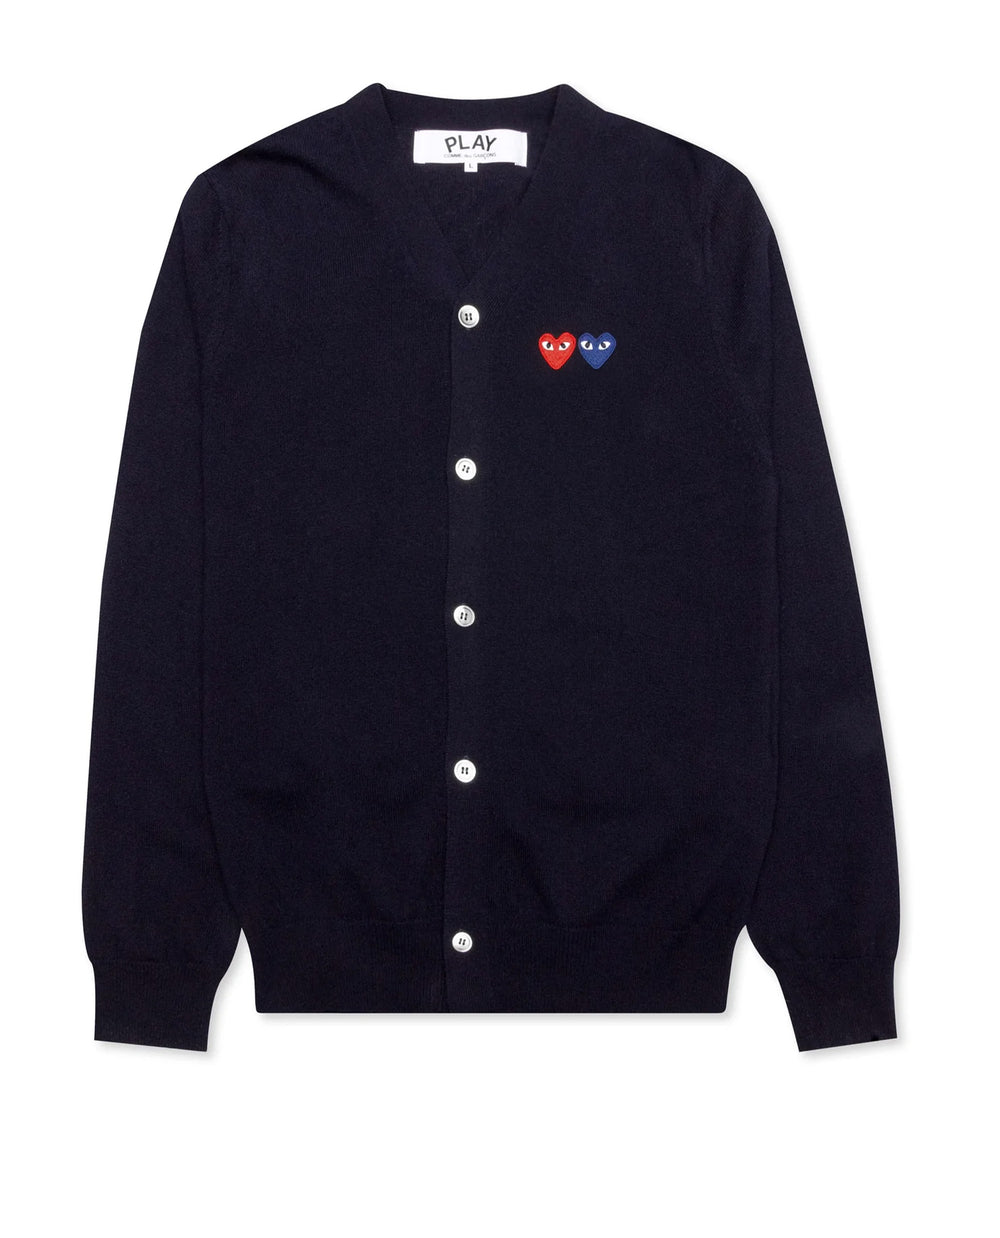 Comme Des Garcons Play Cardigan | STASHED